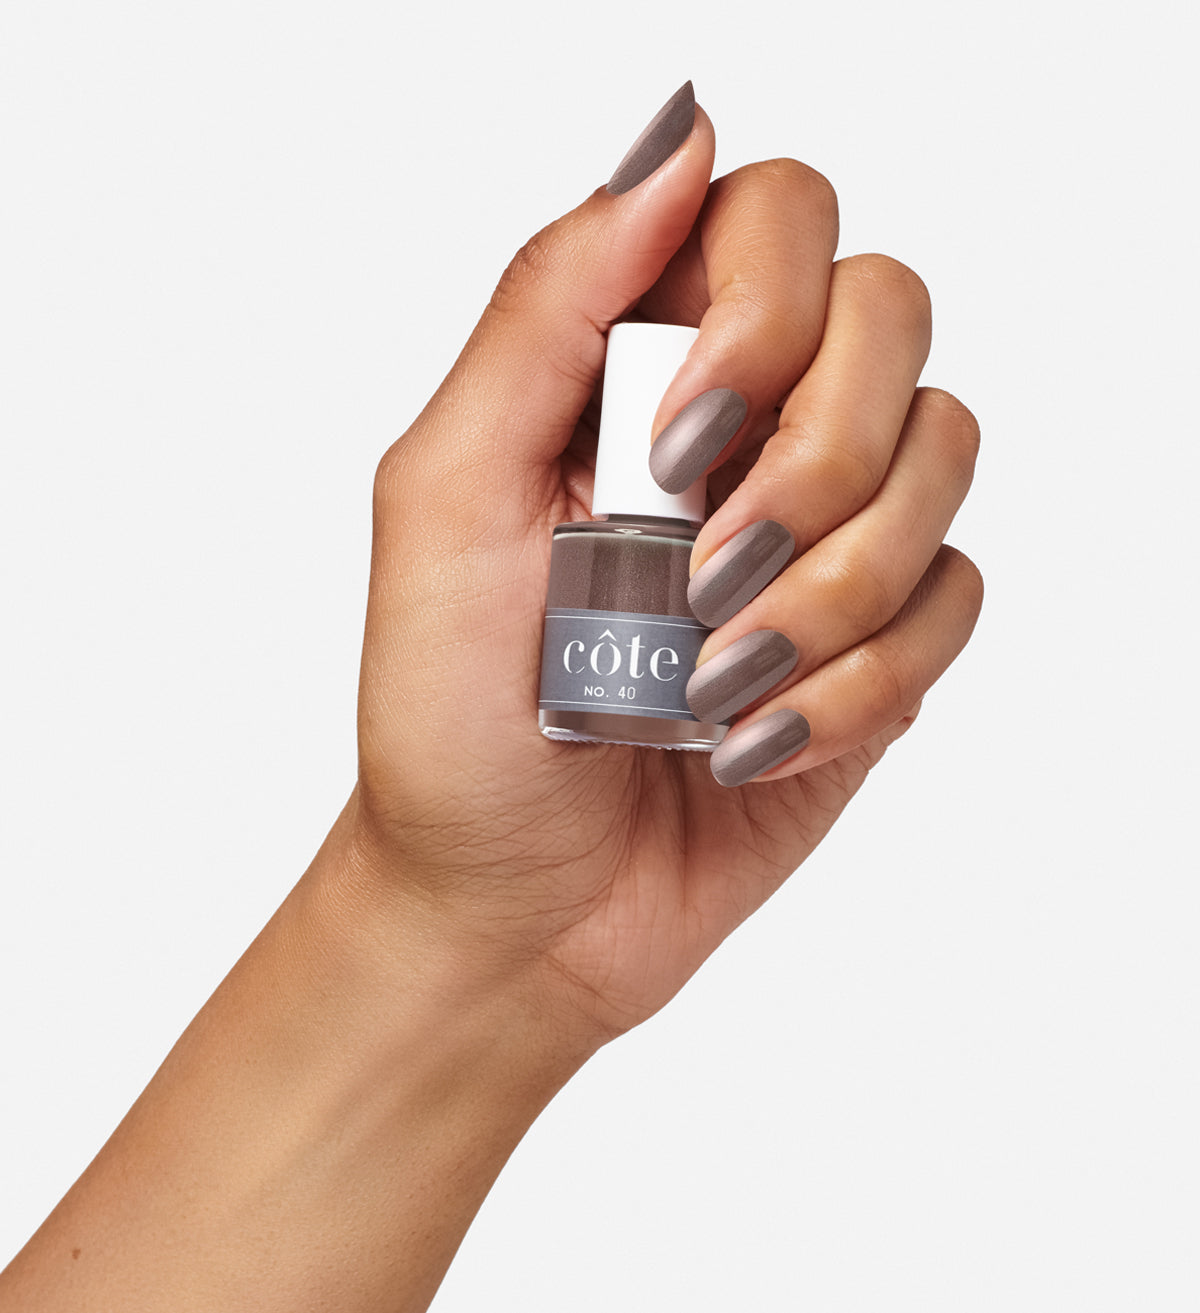 Going Over The Taupe at Cher2: OPI nail polish review | Through The Looking  Glass